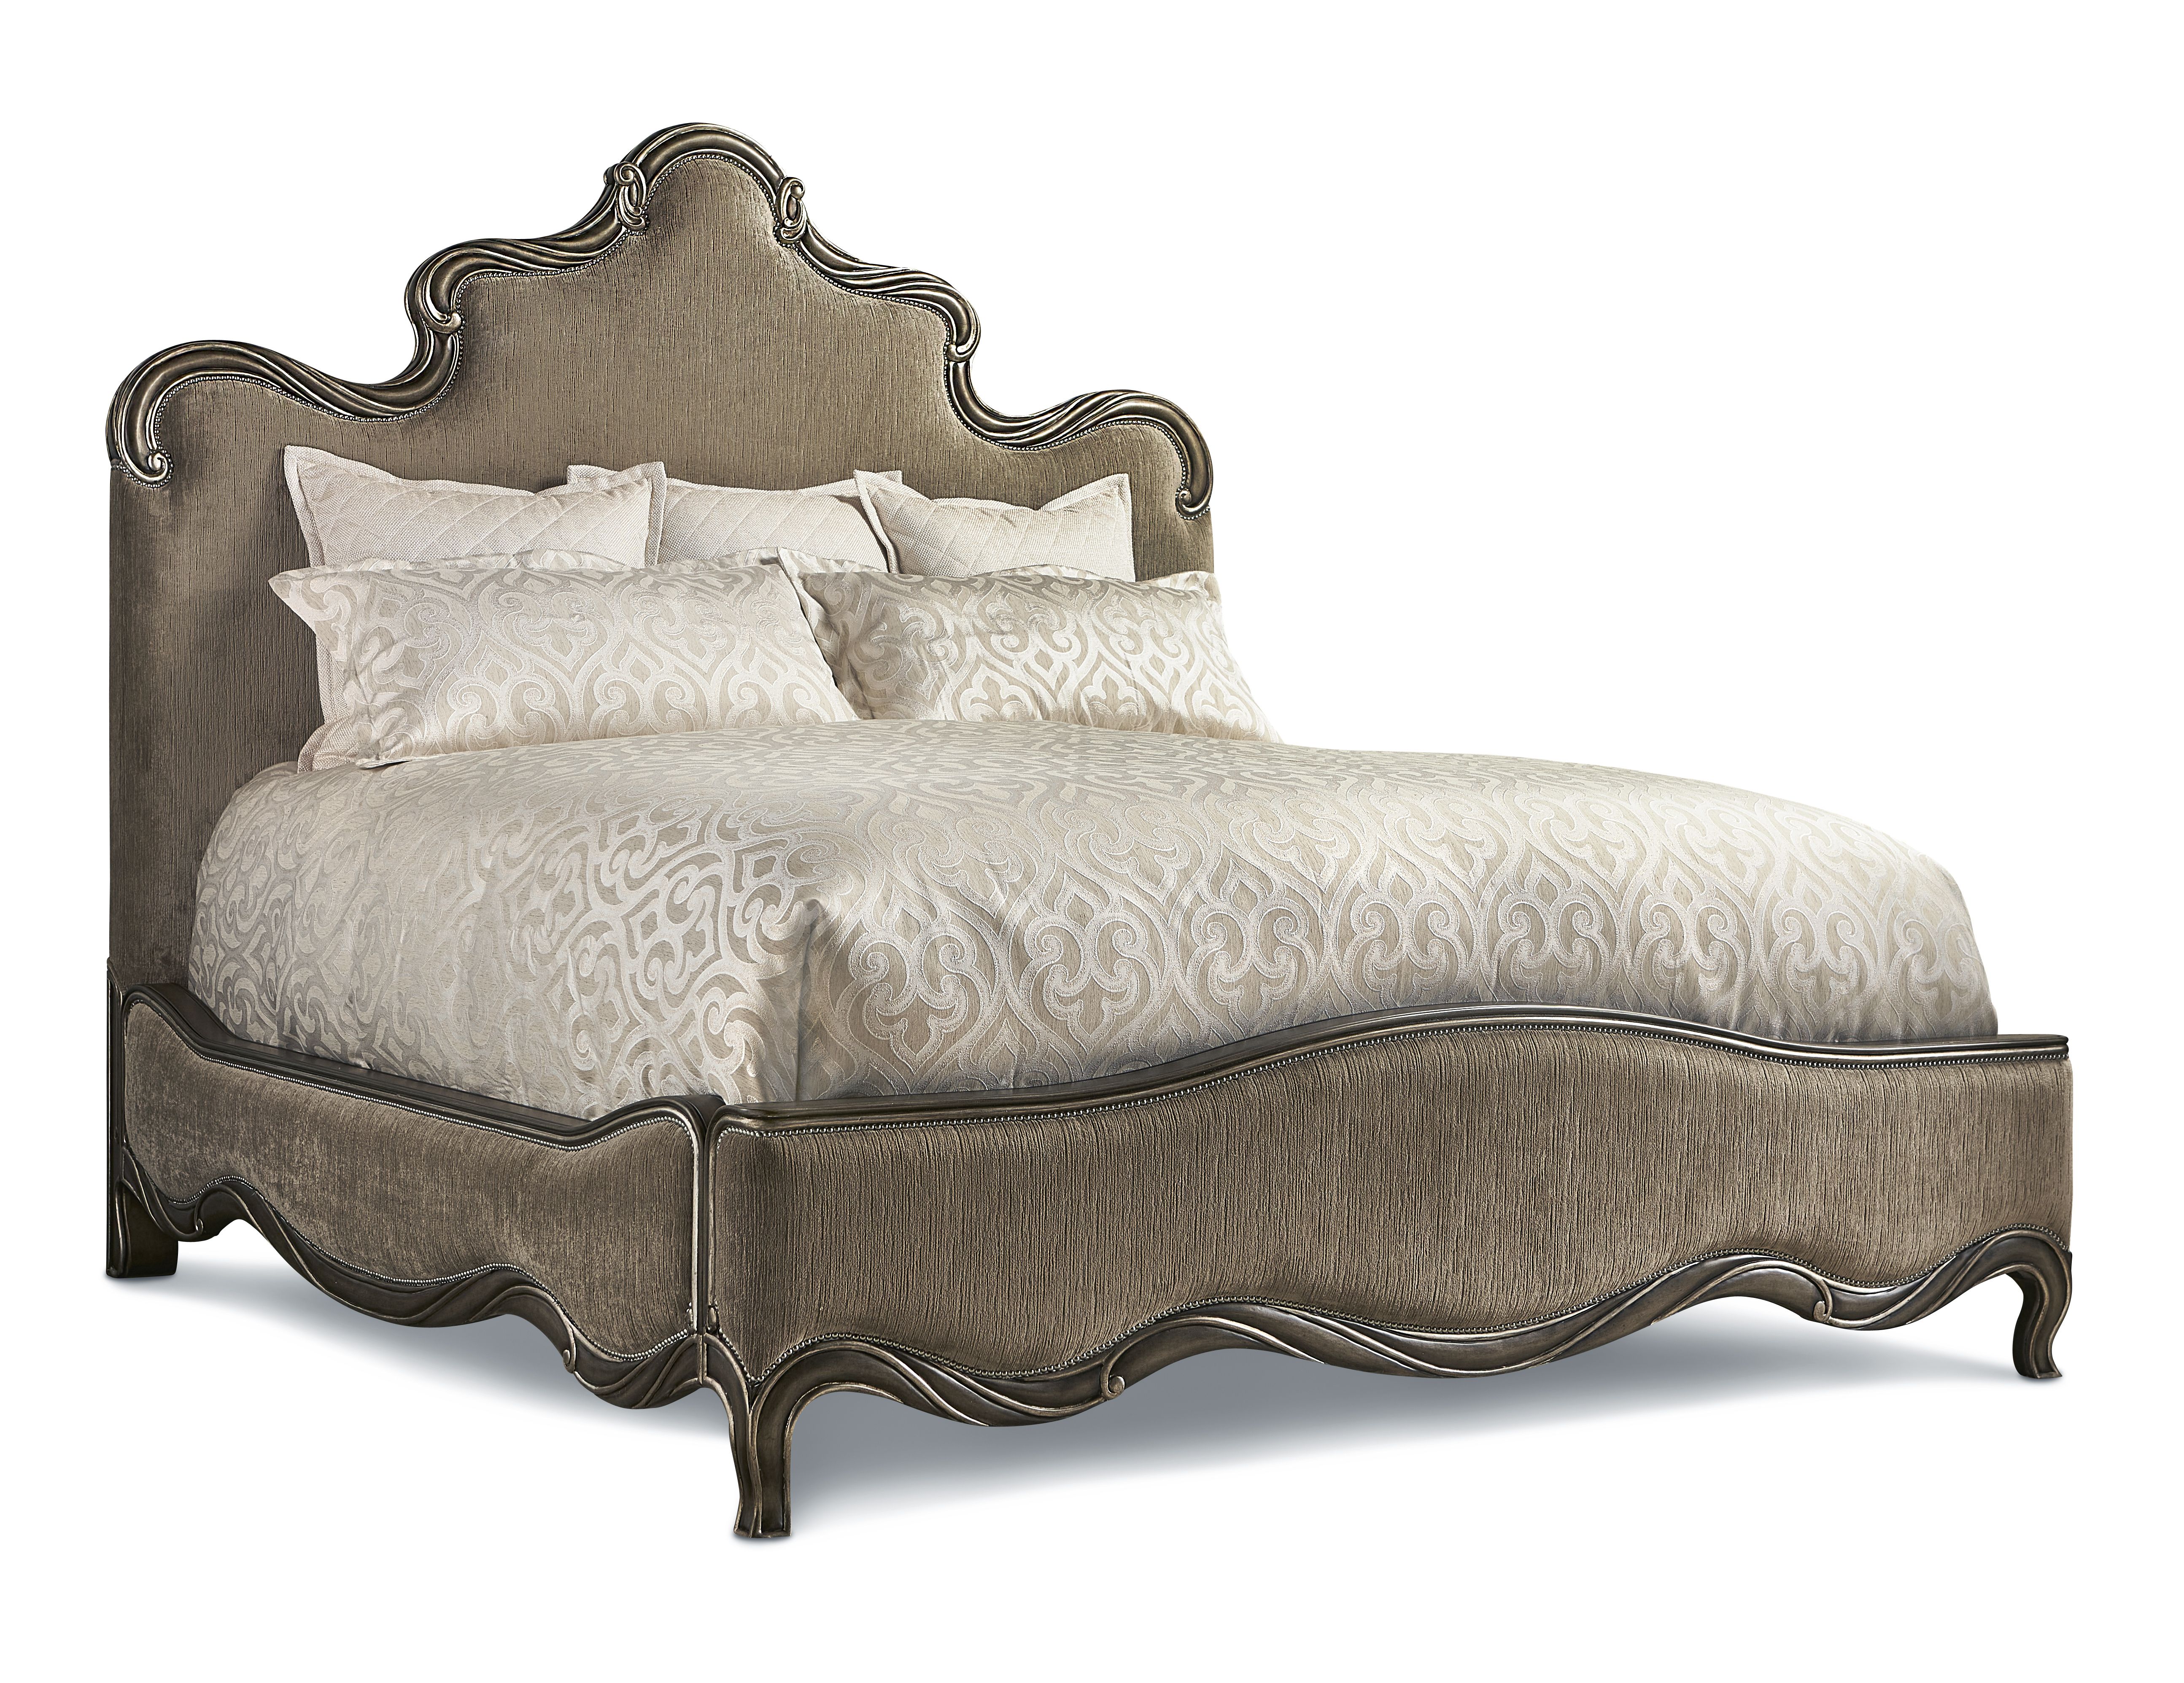 Fancy French Royal Grand Orleans master bed